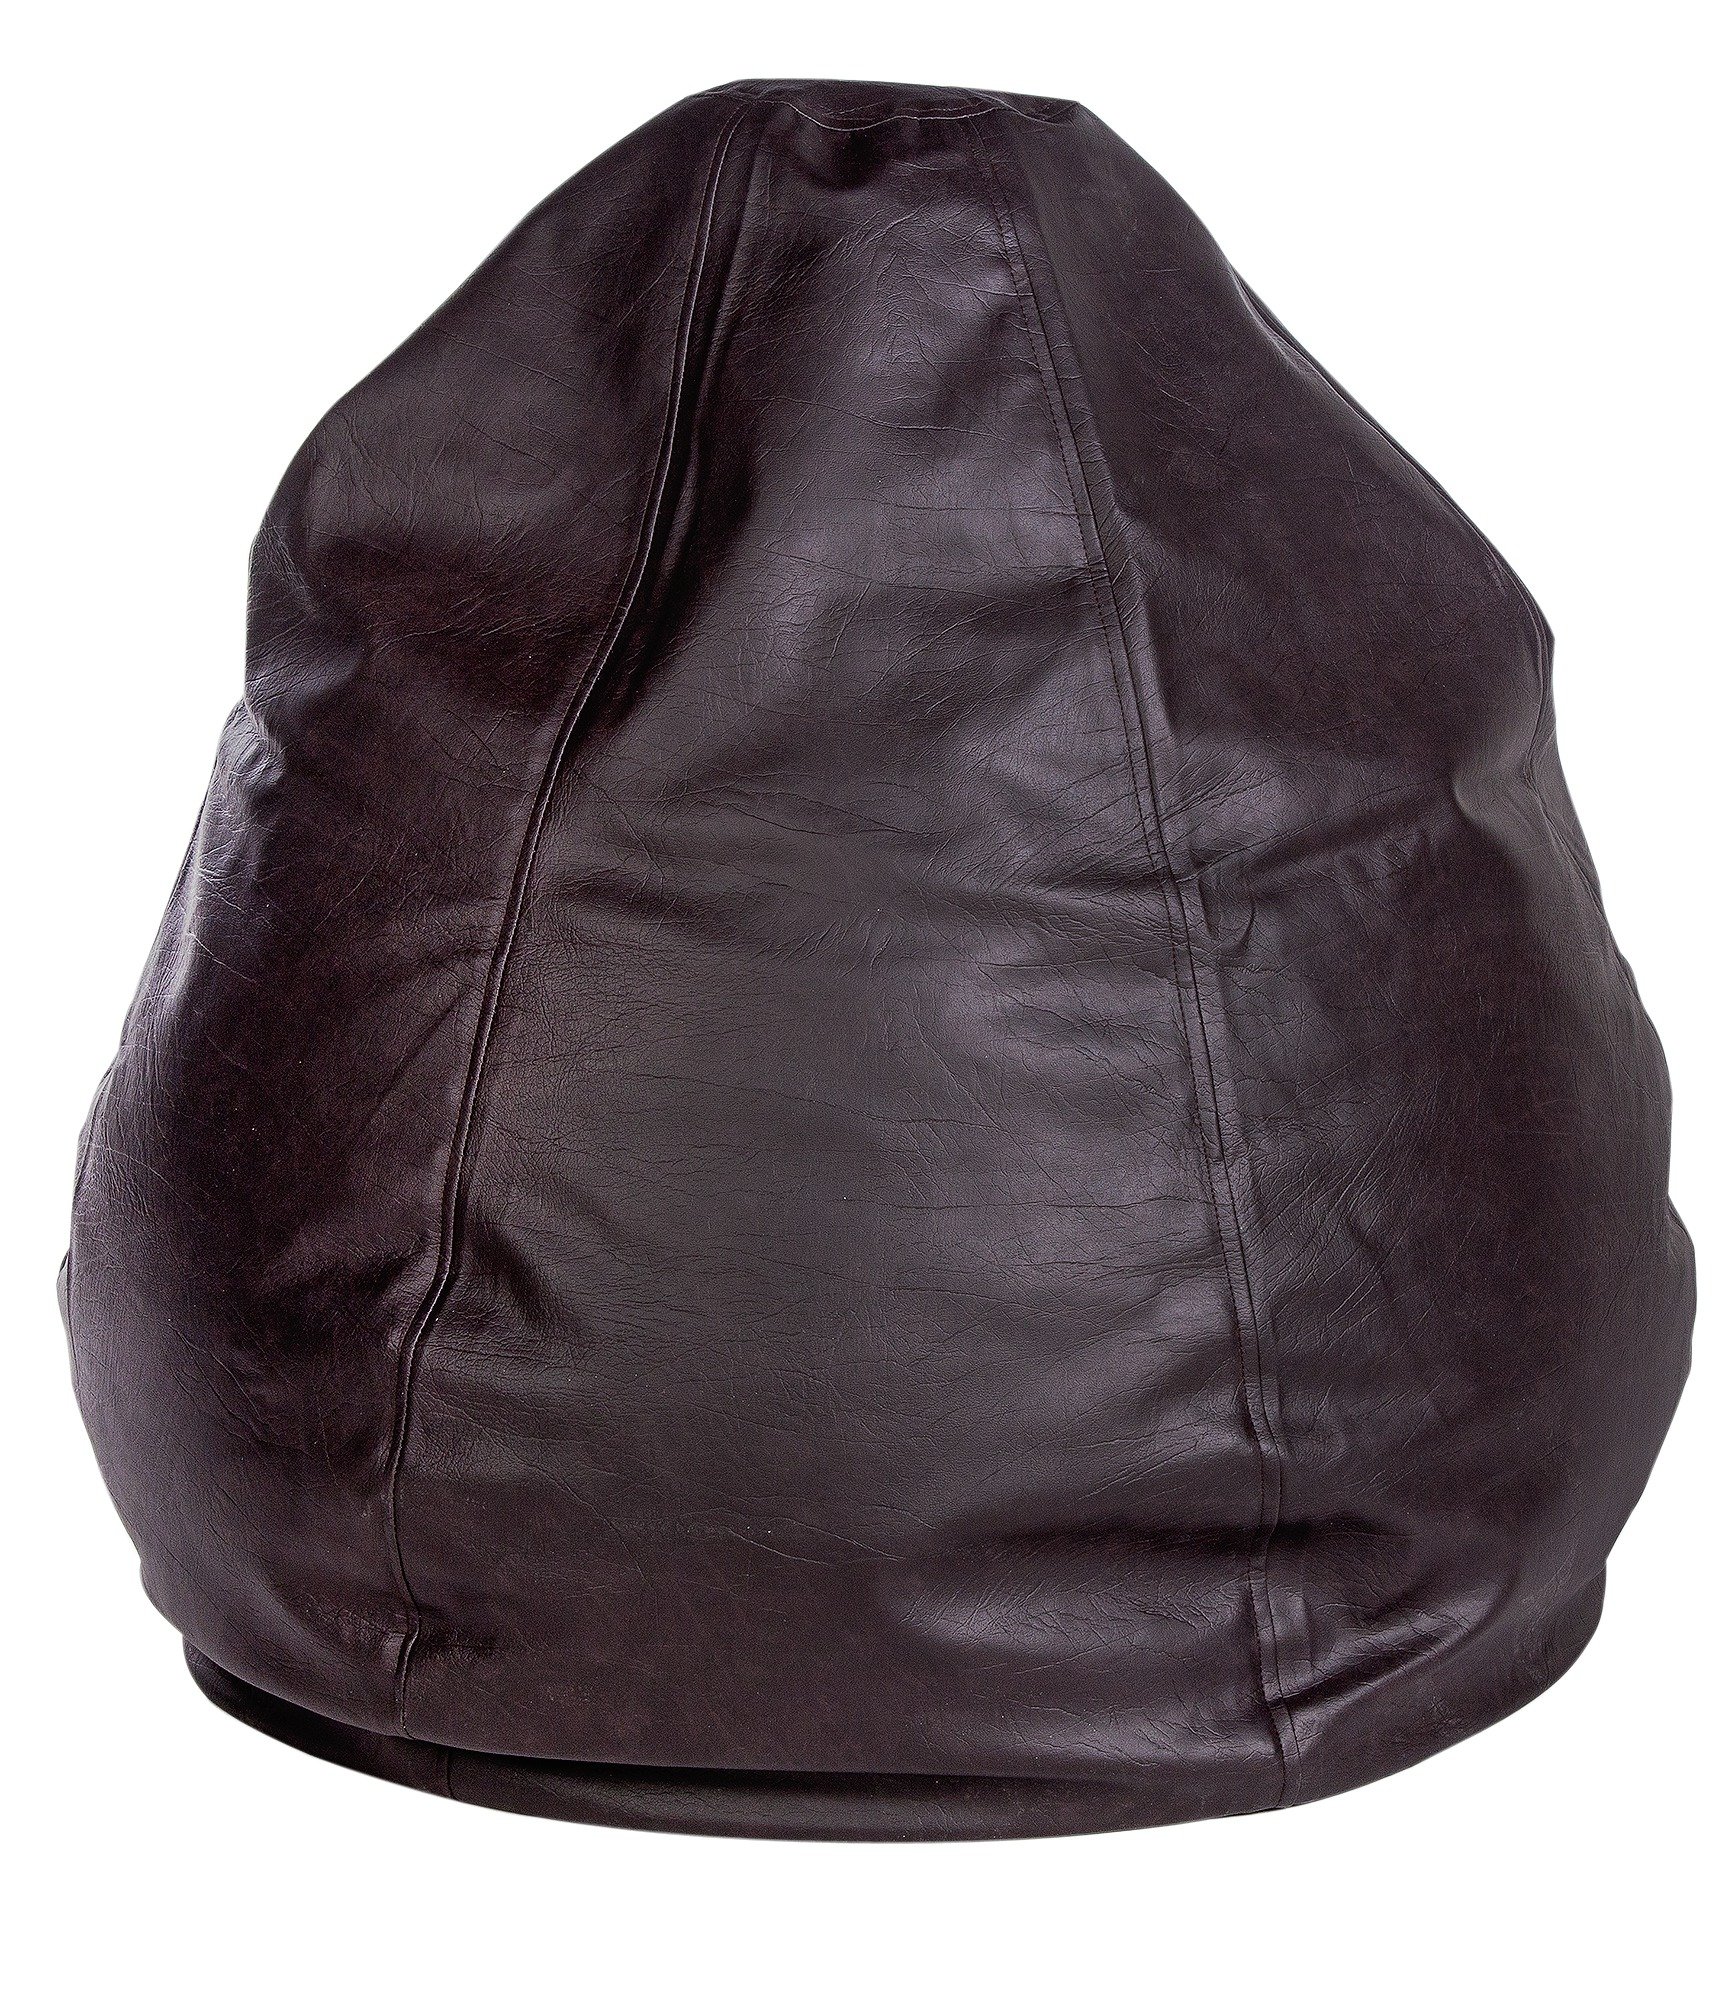 Argos Home New Pear Extra Large Bean Bag - Chocolate